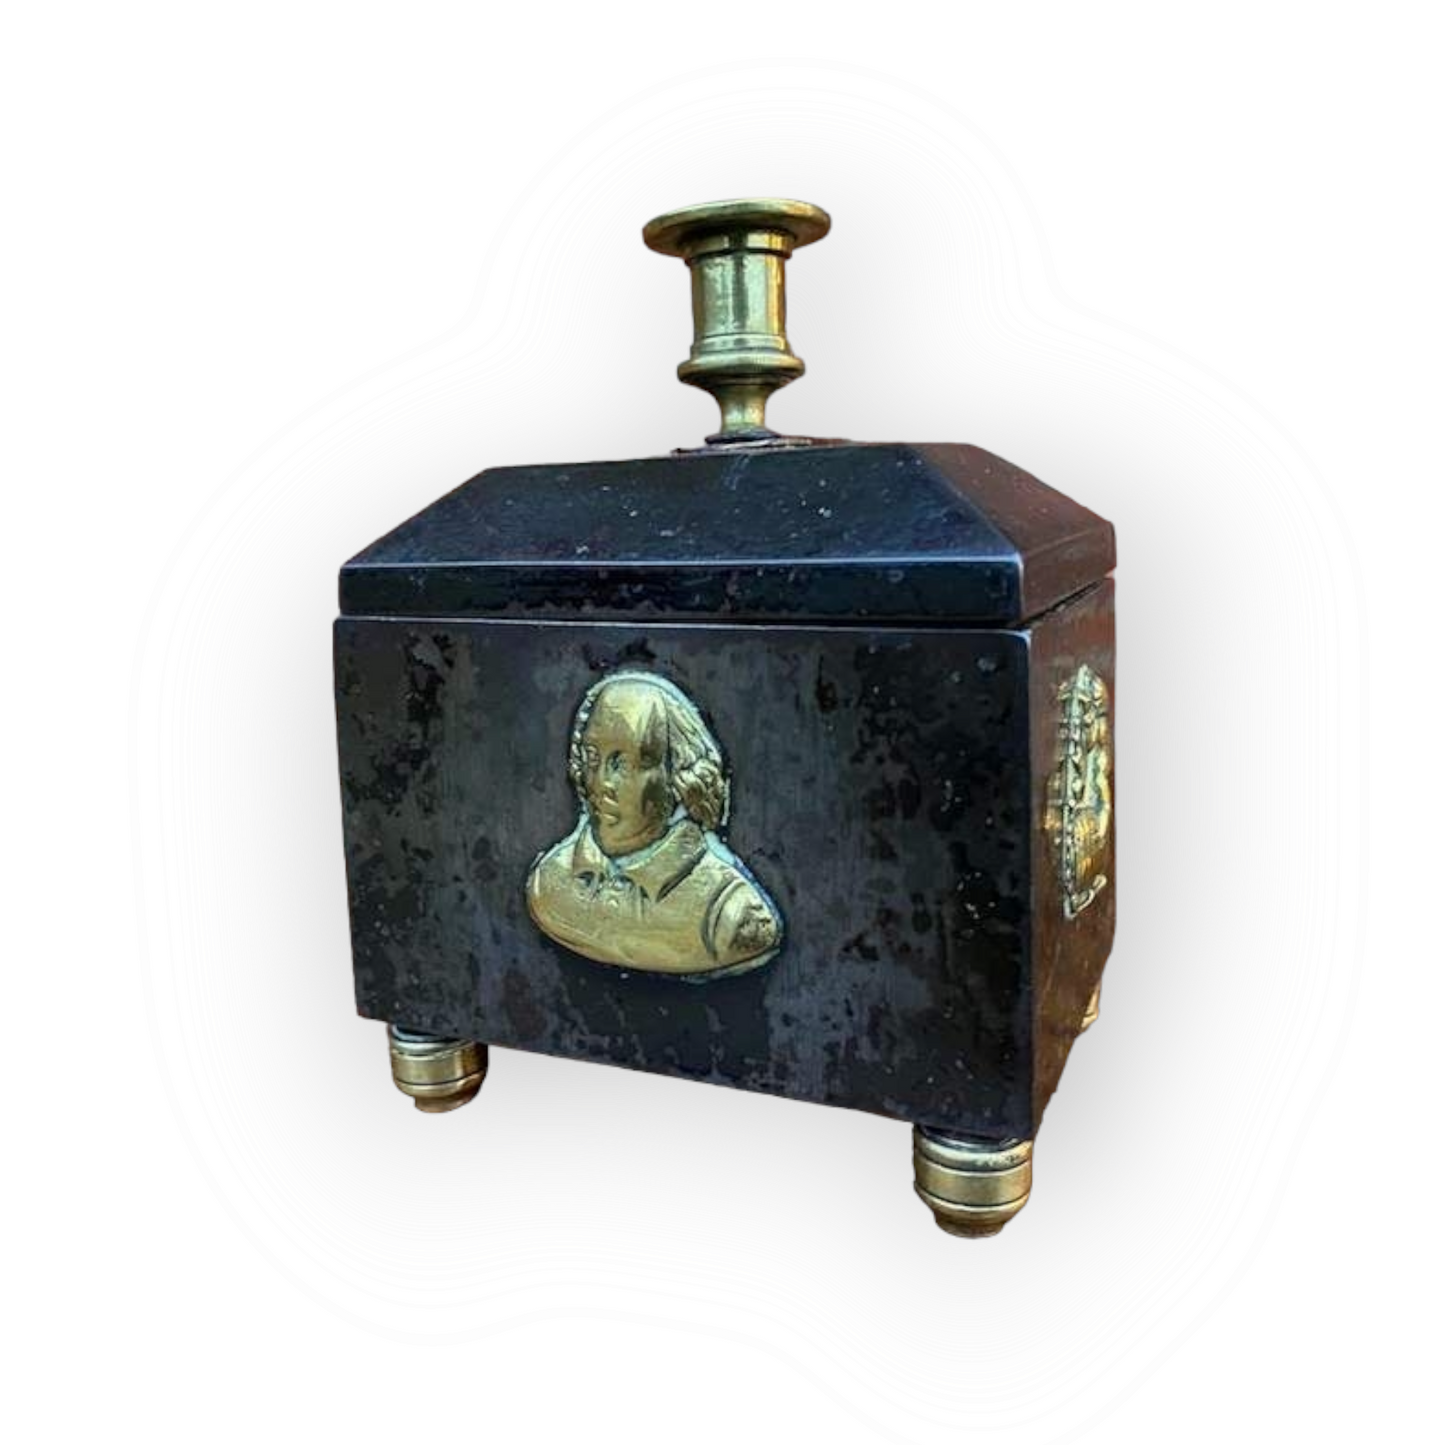 William Shakespeare Interest - A 19th Century English Antique Steel & Brass Tobacco Jar Decorated With Images of Shakespeare